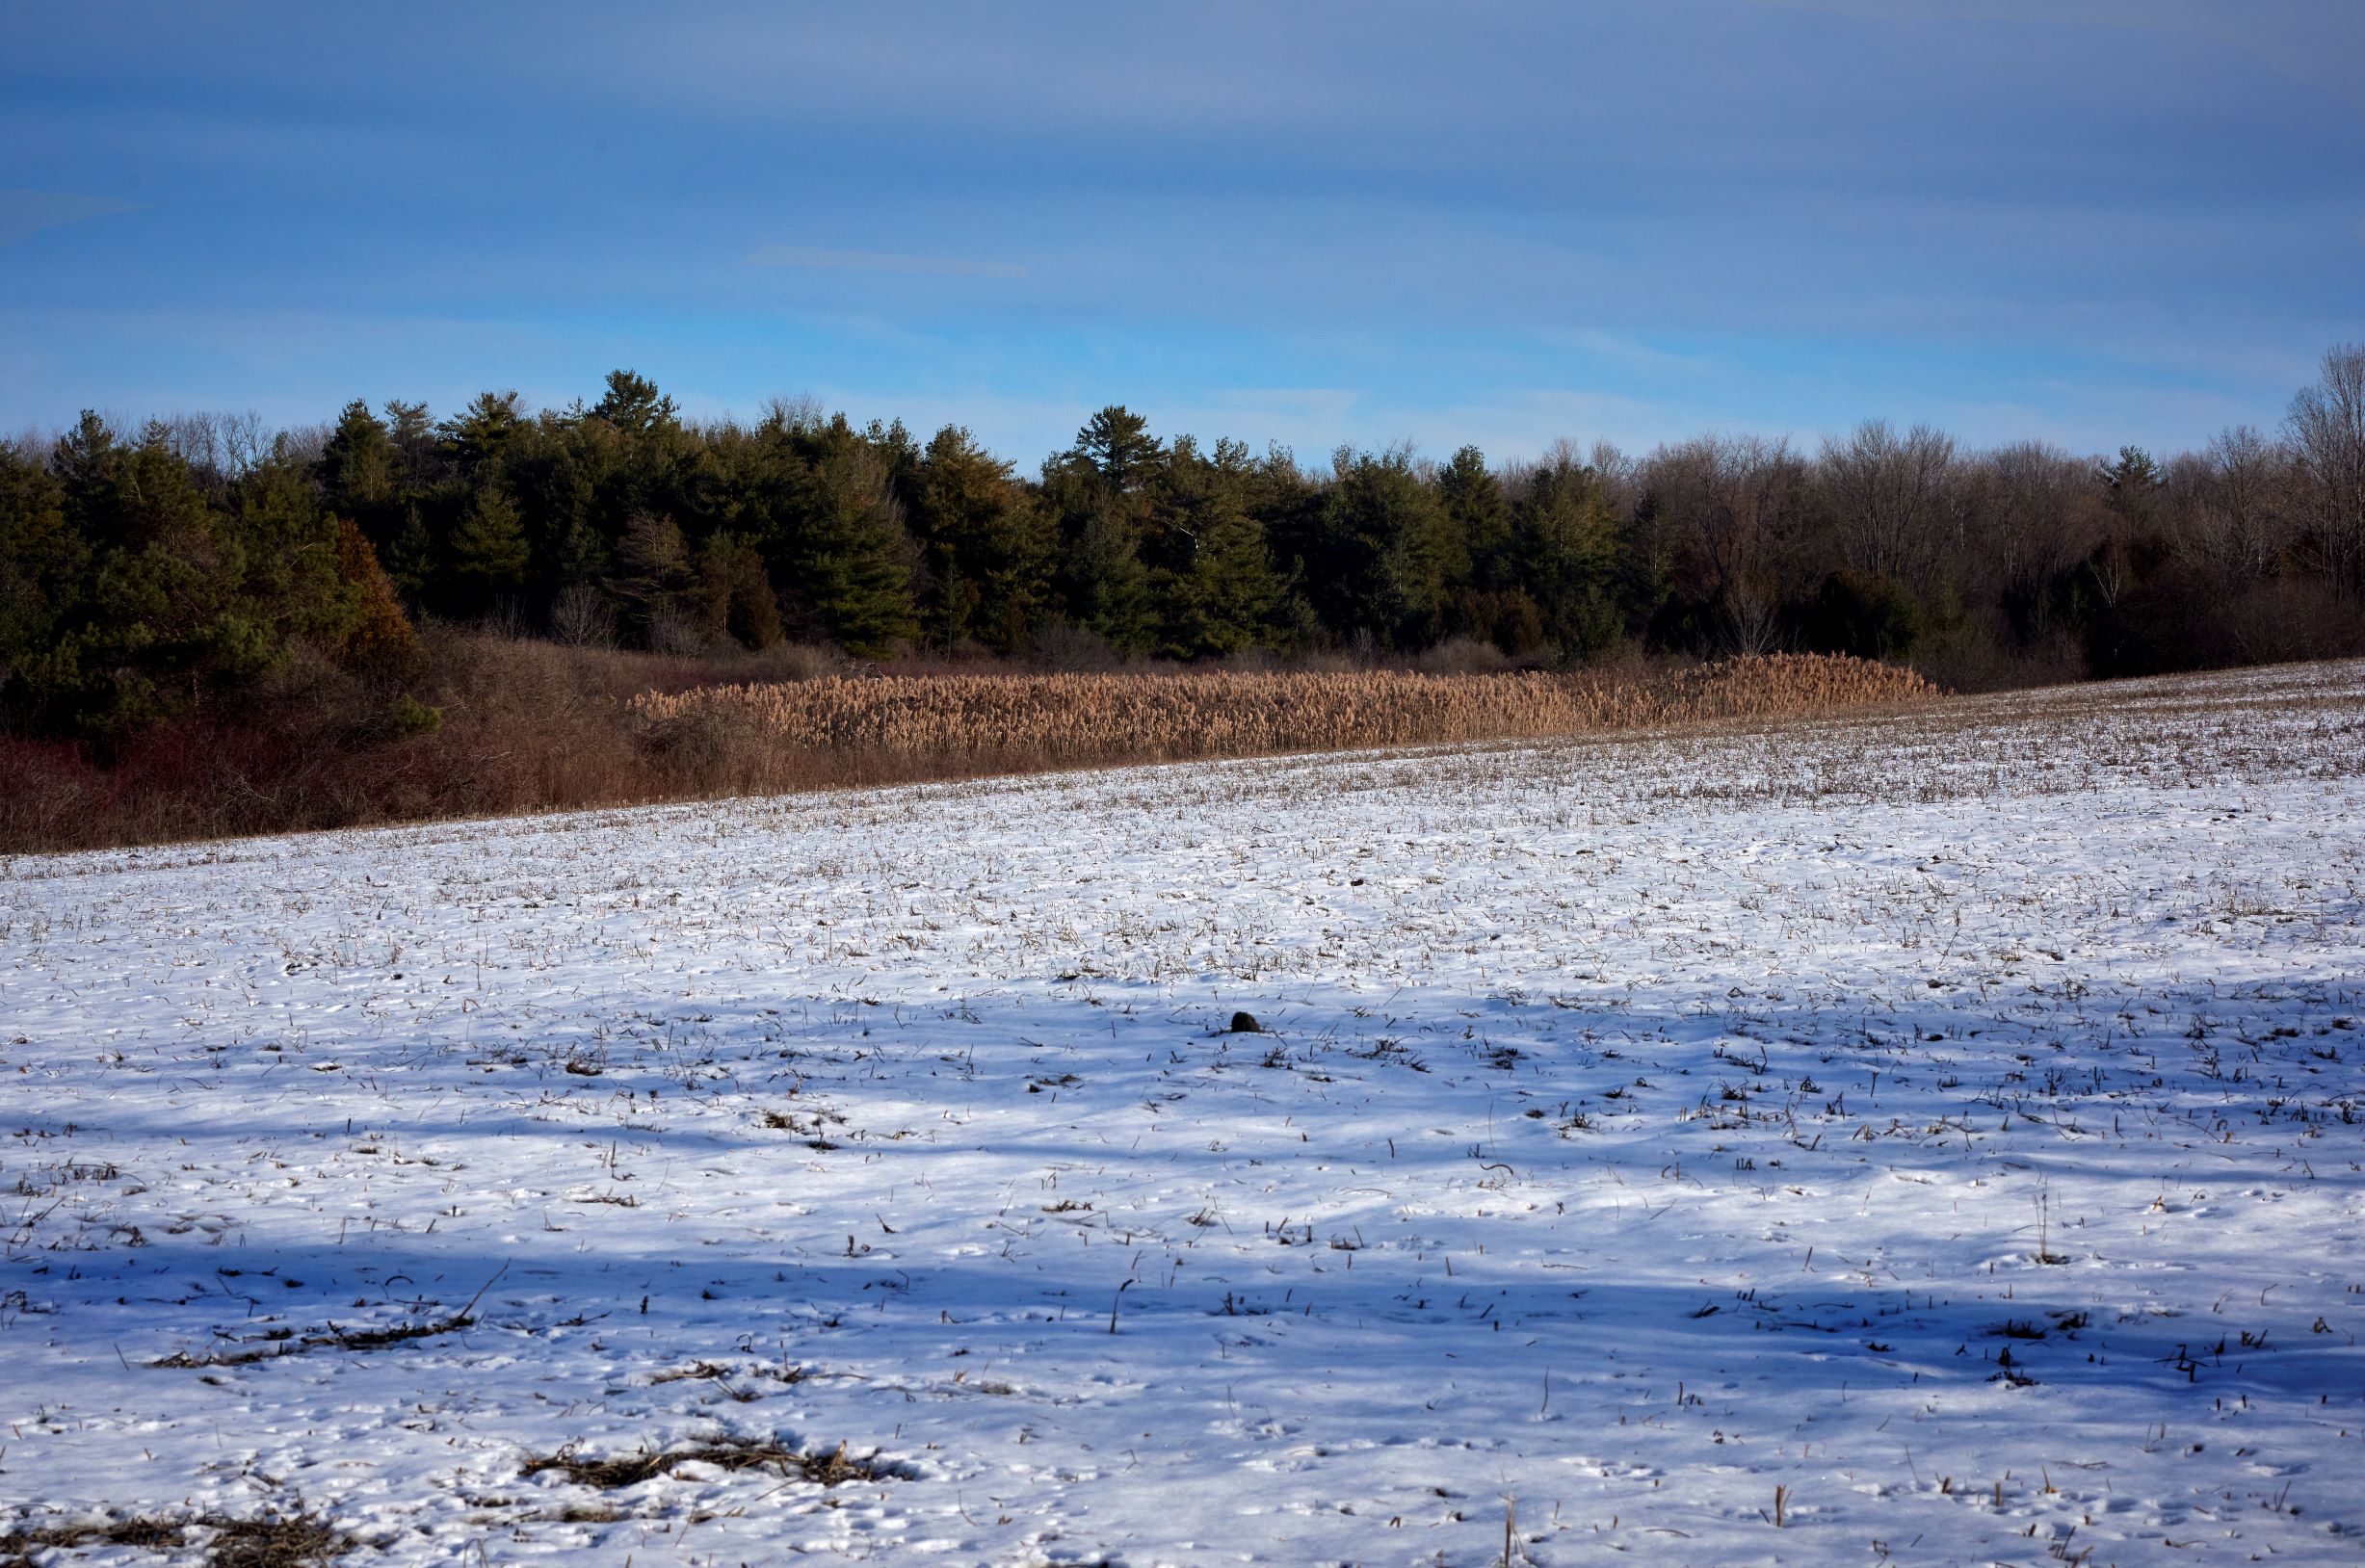 Lower Duffins Creek Wetland in the winter. Photo by Philip Jessup